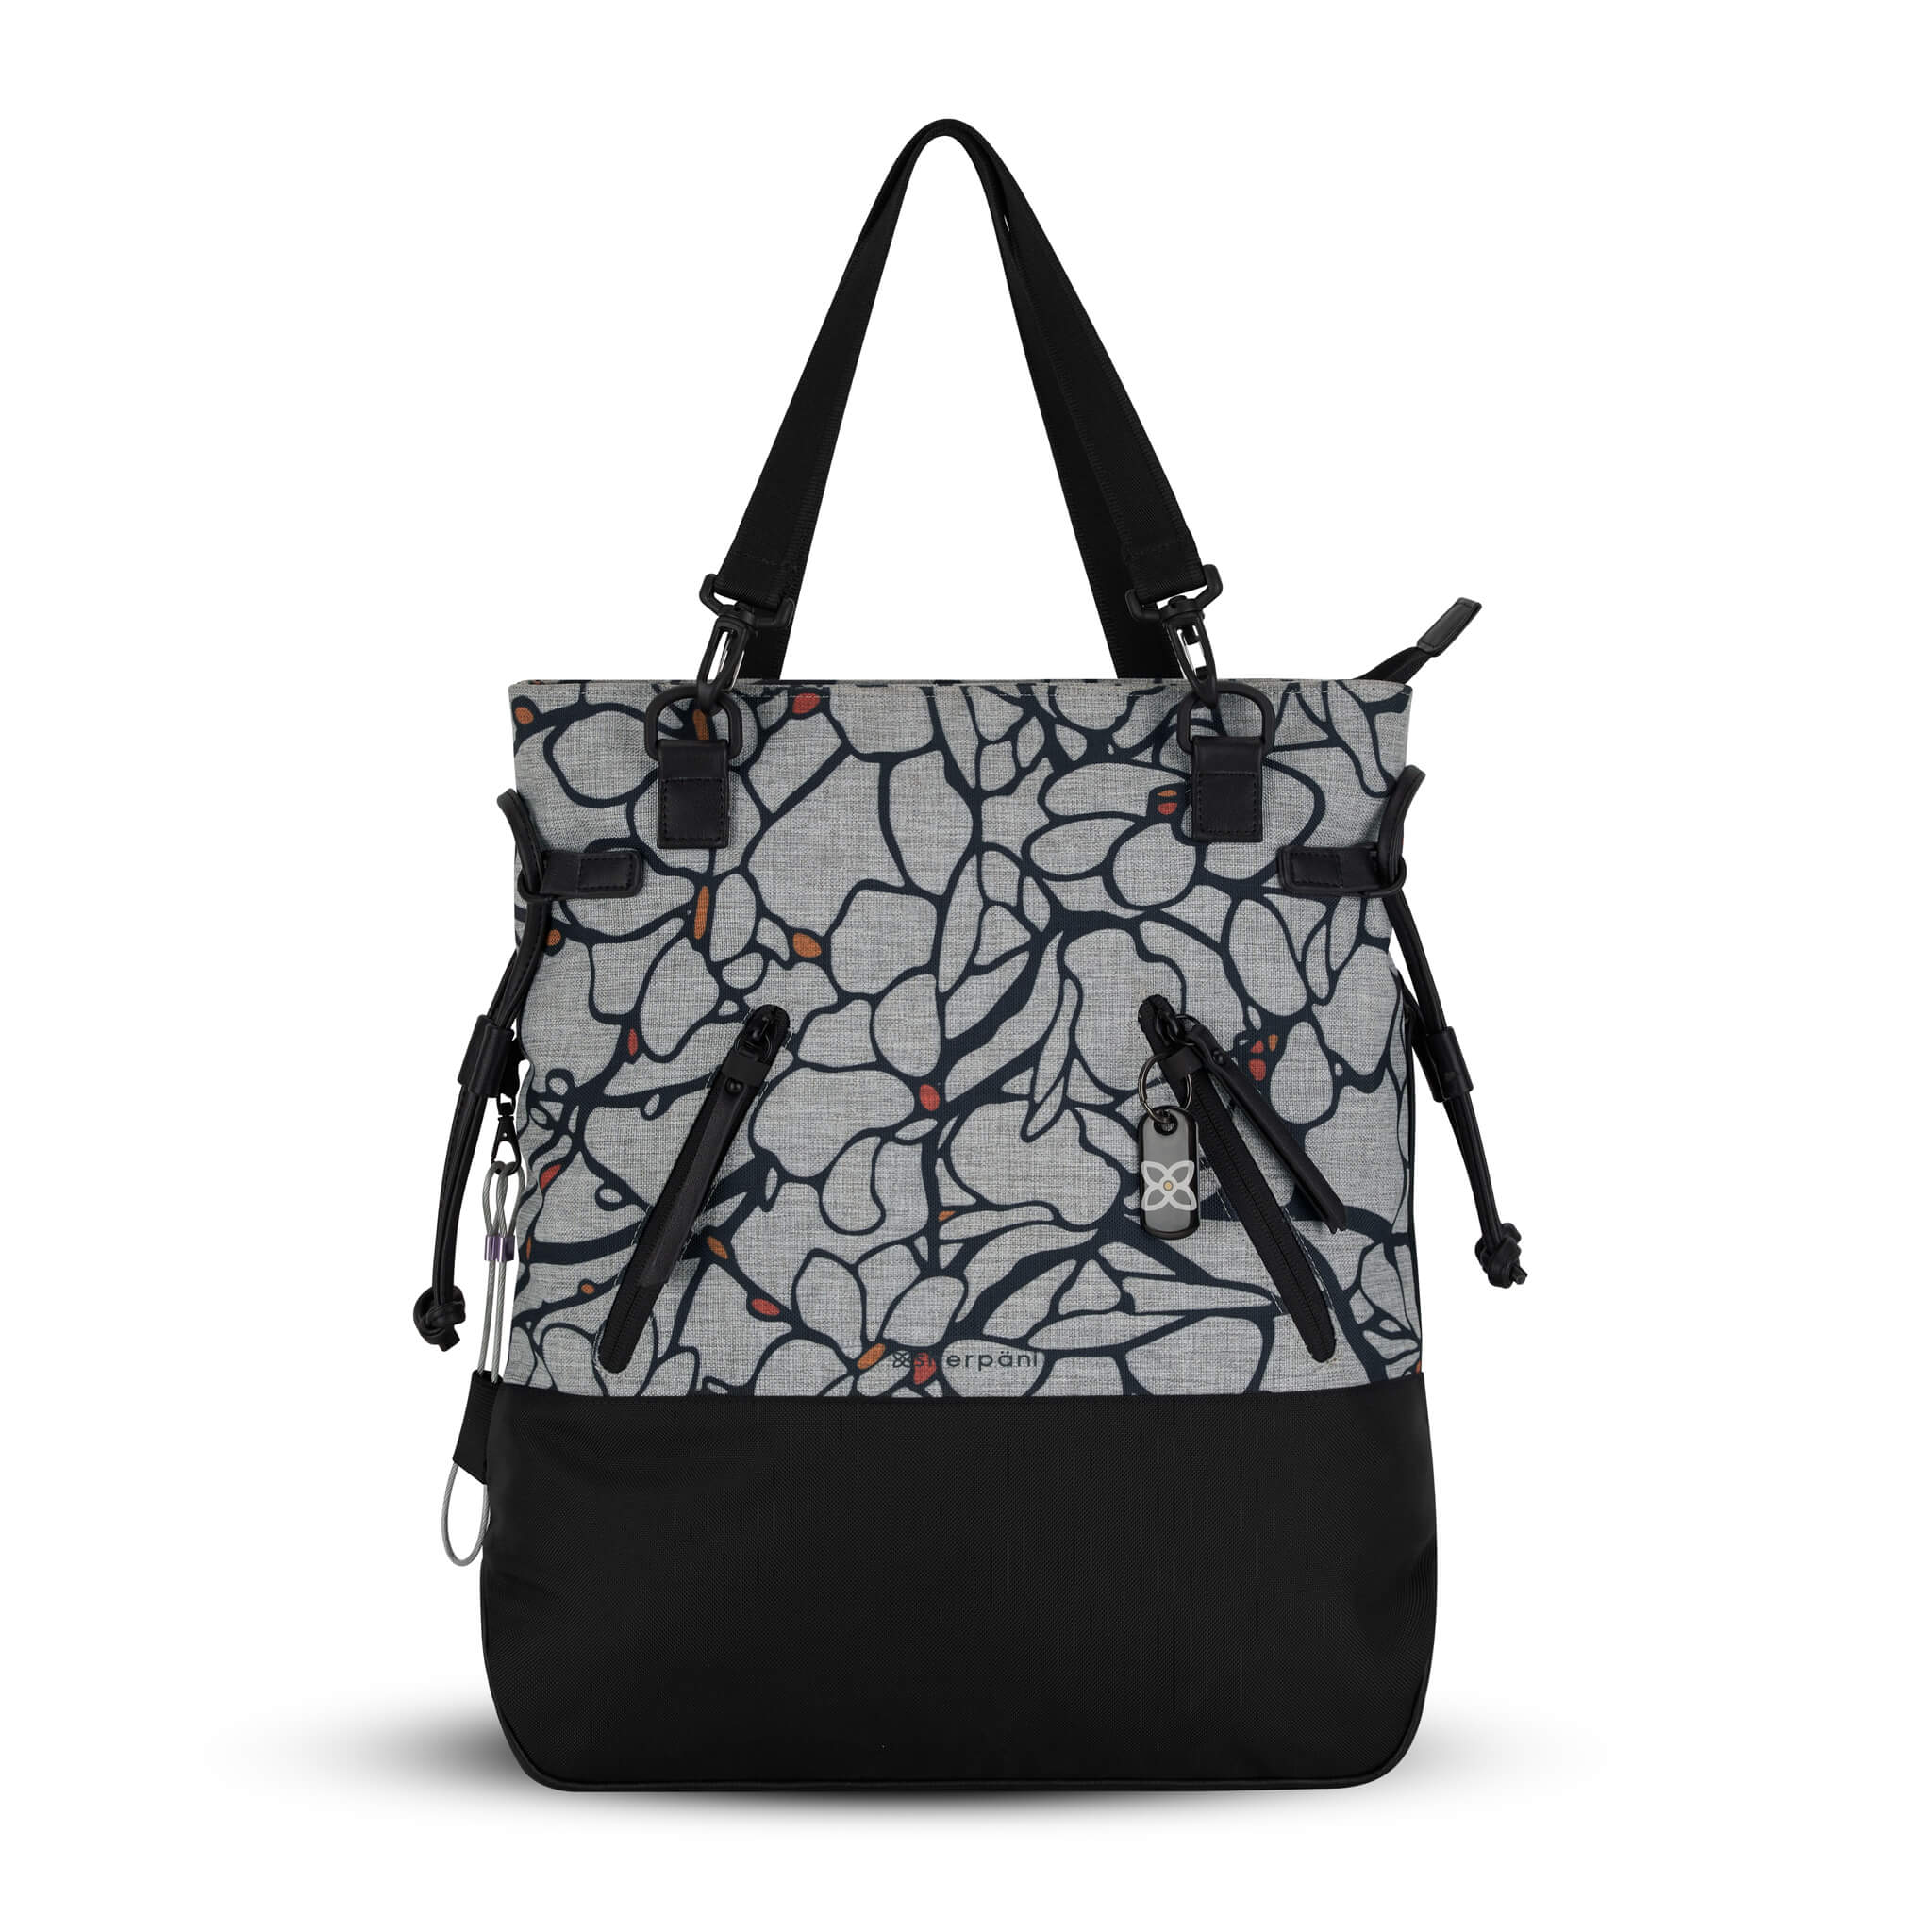 Flat front view of the Sherpani Anti-Theft tote backpack, the Tempest in Sakura. The convertible bag includes RFID protection, locking zipper pockets, adjustable straps, and a trolley sleeve. 